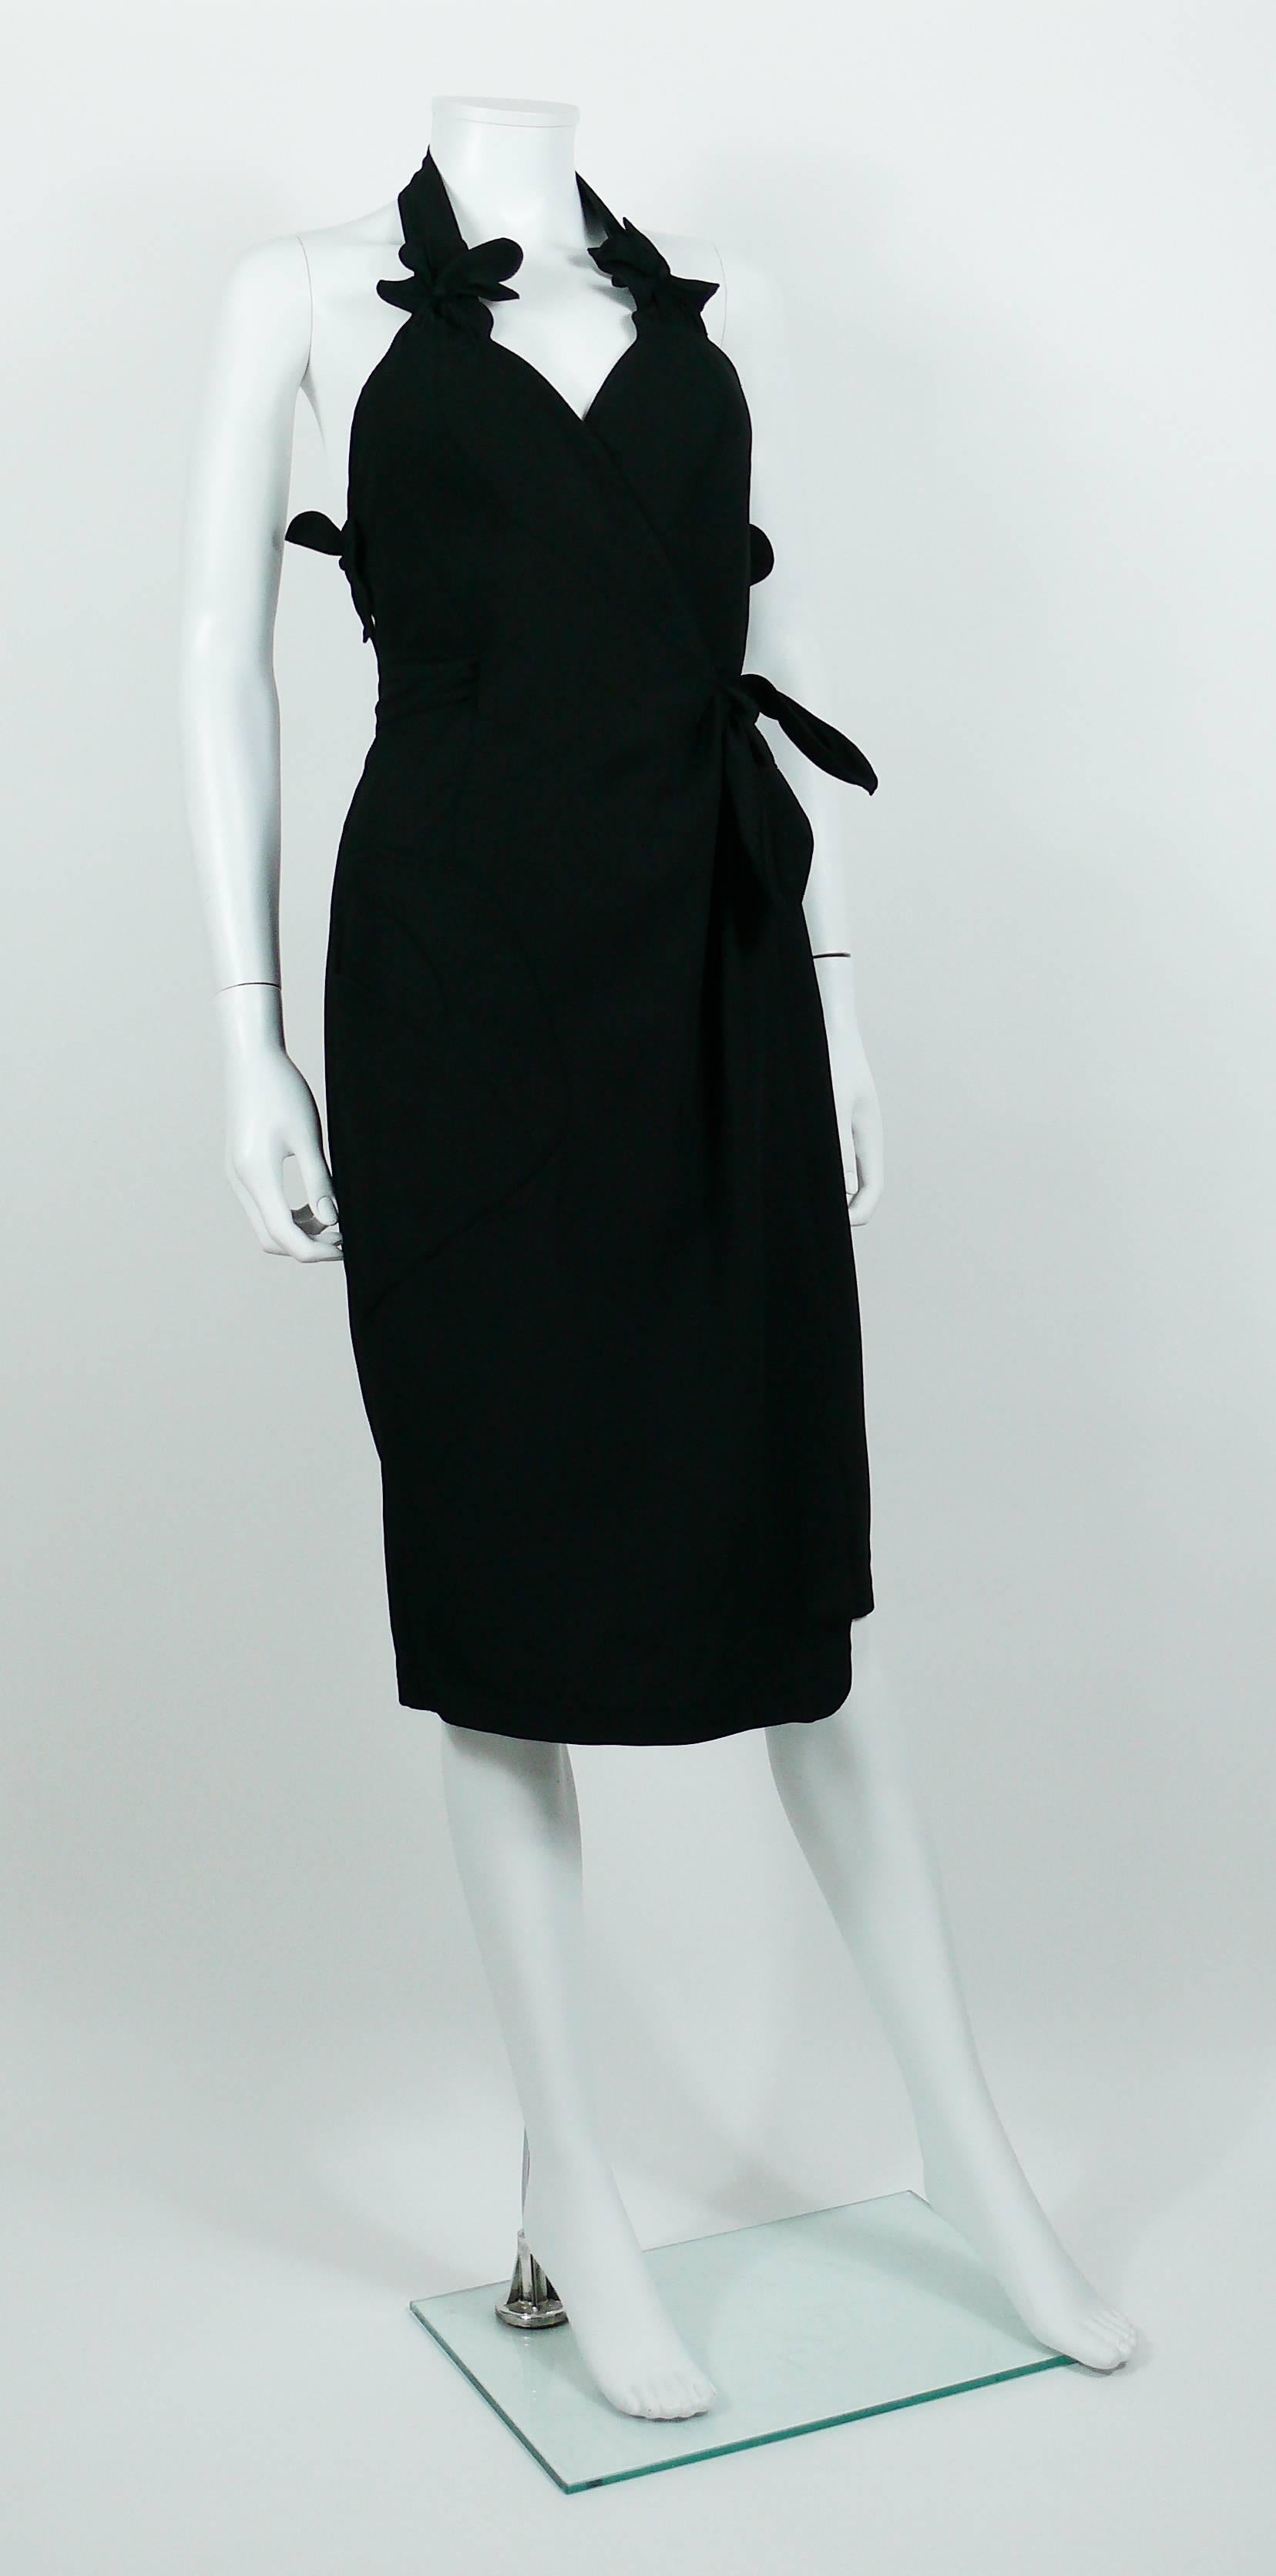 THIERRY MUGLER vintage black halter dress with gorgeous floral appliqué detail and back.

Wrapped waist construction.
Asymetric front pocket.

Label reads THIERRY MUGLER Paris Made in France.

Size label reads : 38.

Indicative measurements taken